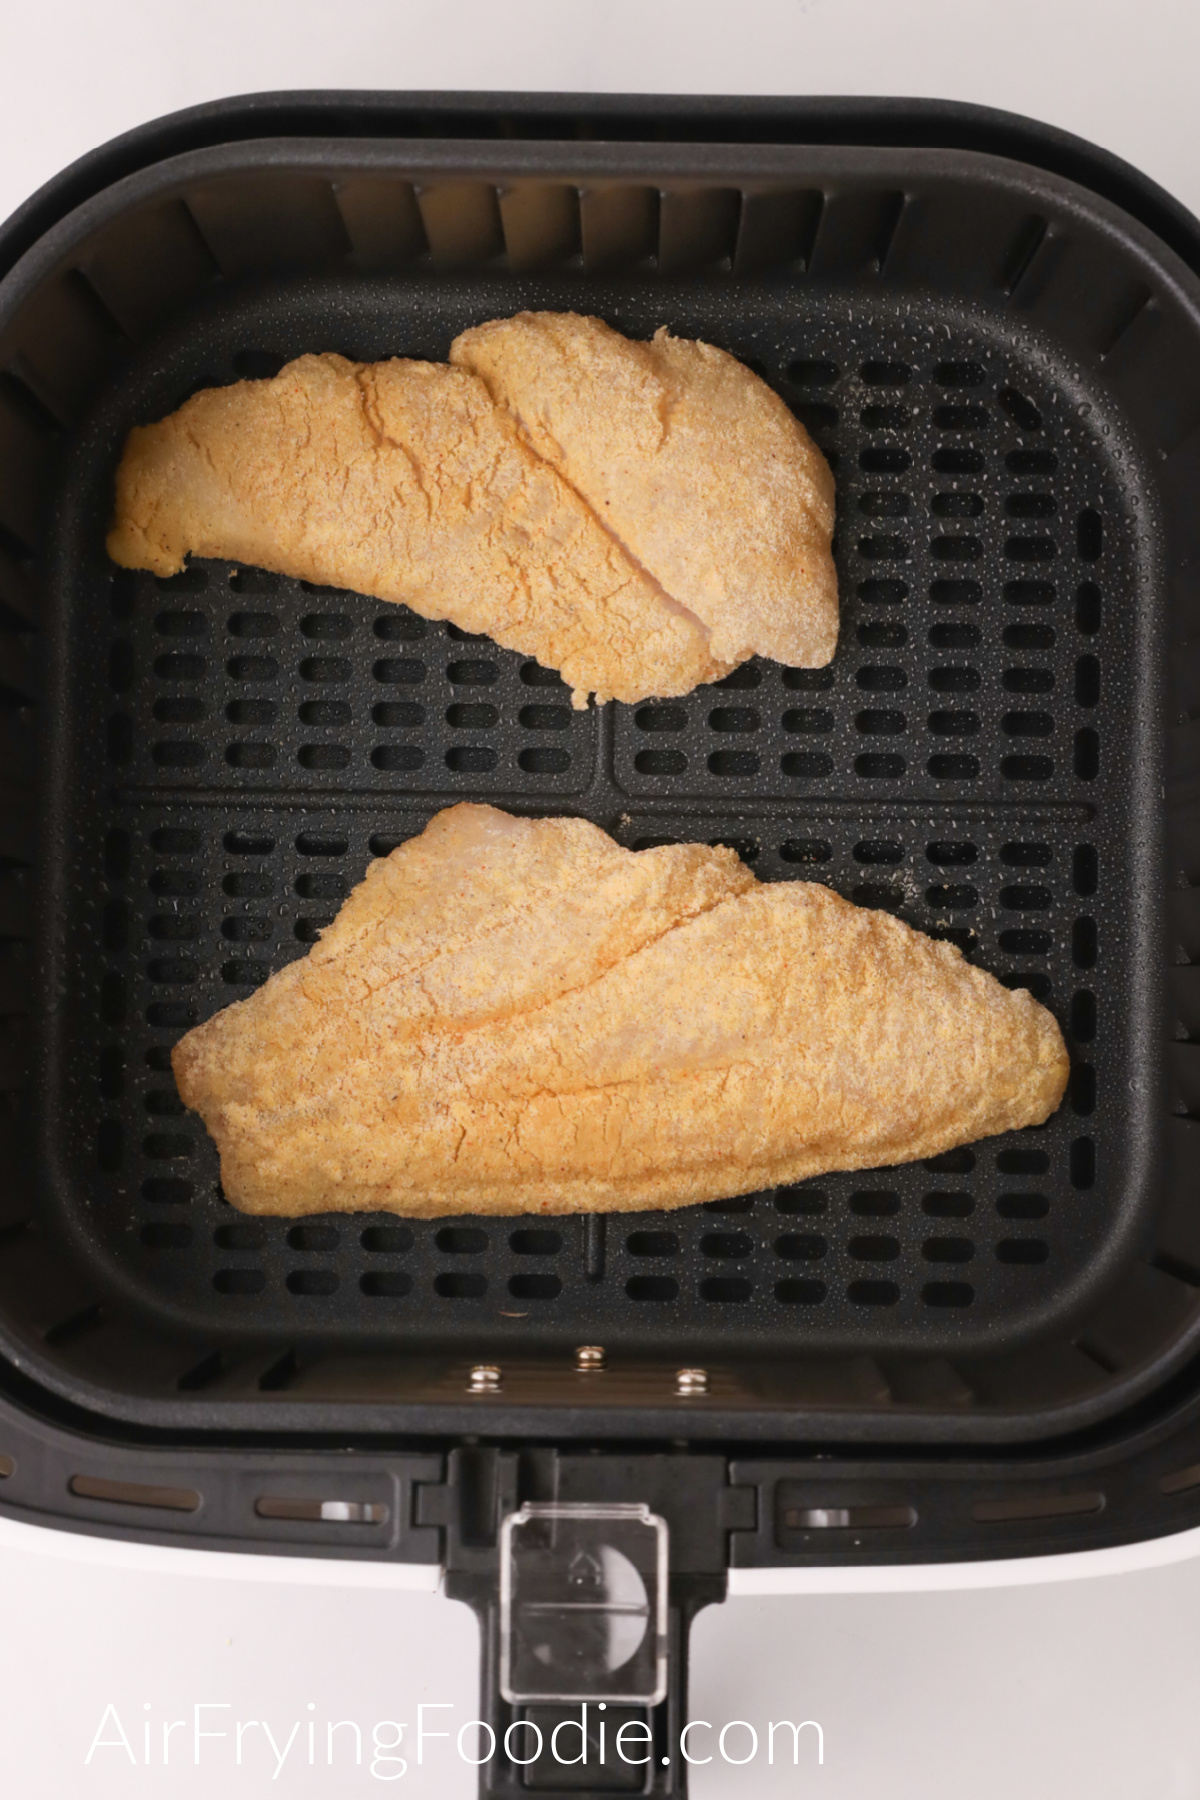 Breaded catfish fillets in the basket of the air fryer, ready to cook.